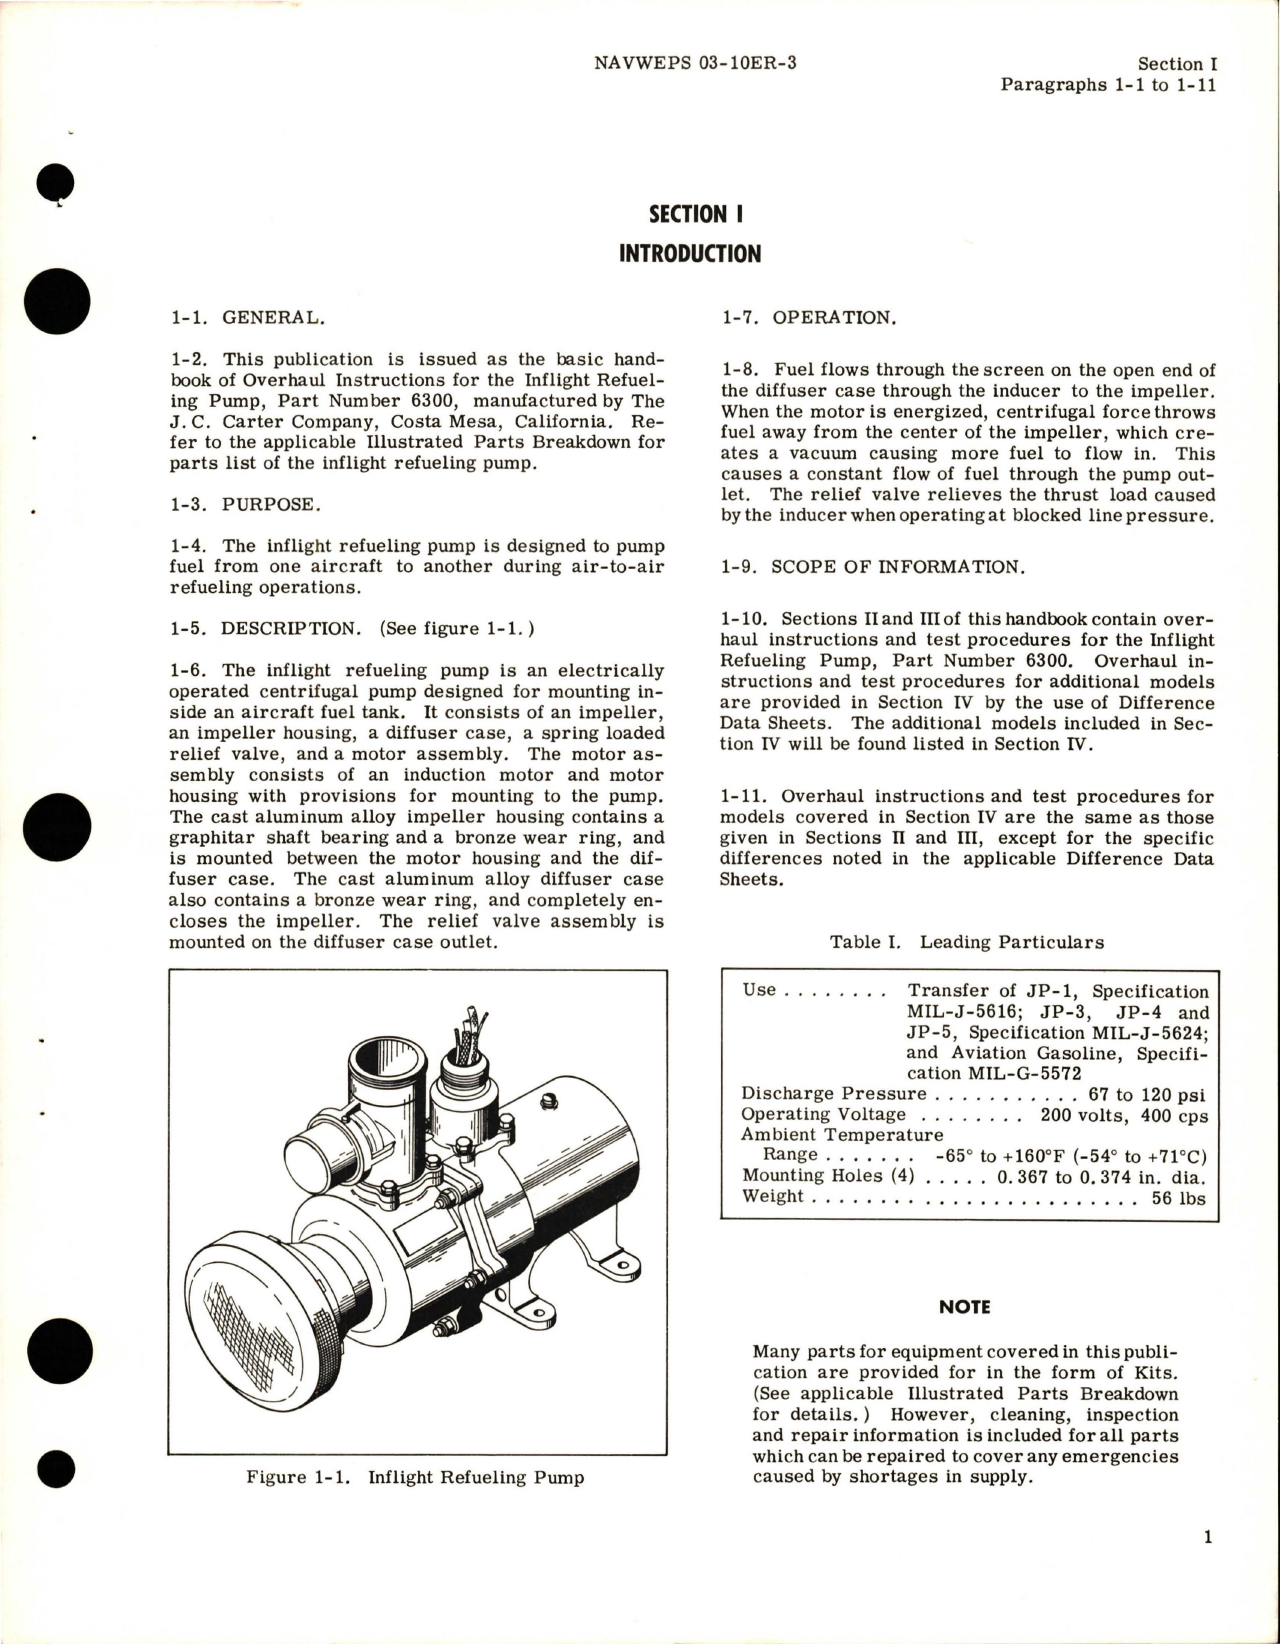 Sample page 5 from AirCorps Library document: Overhaul Instructions for Inflight Refueling Pump - Part 6300 and 6300-1